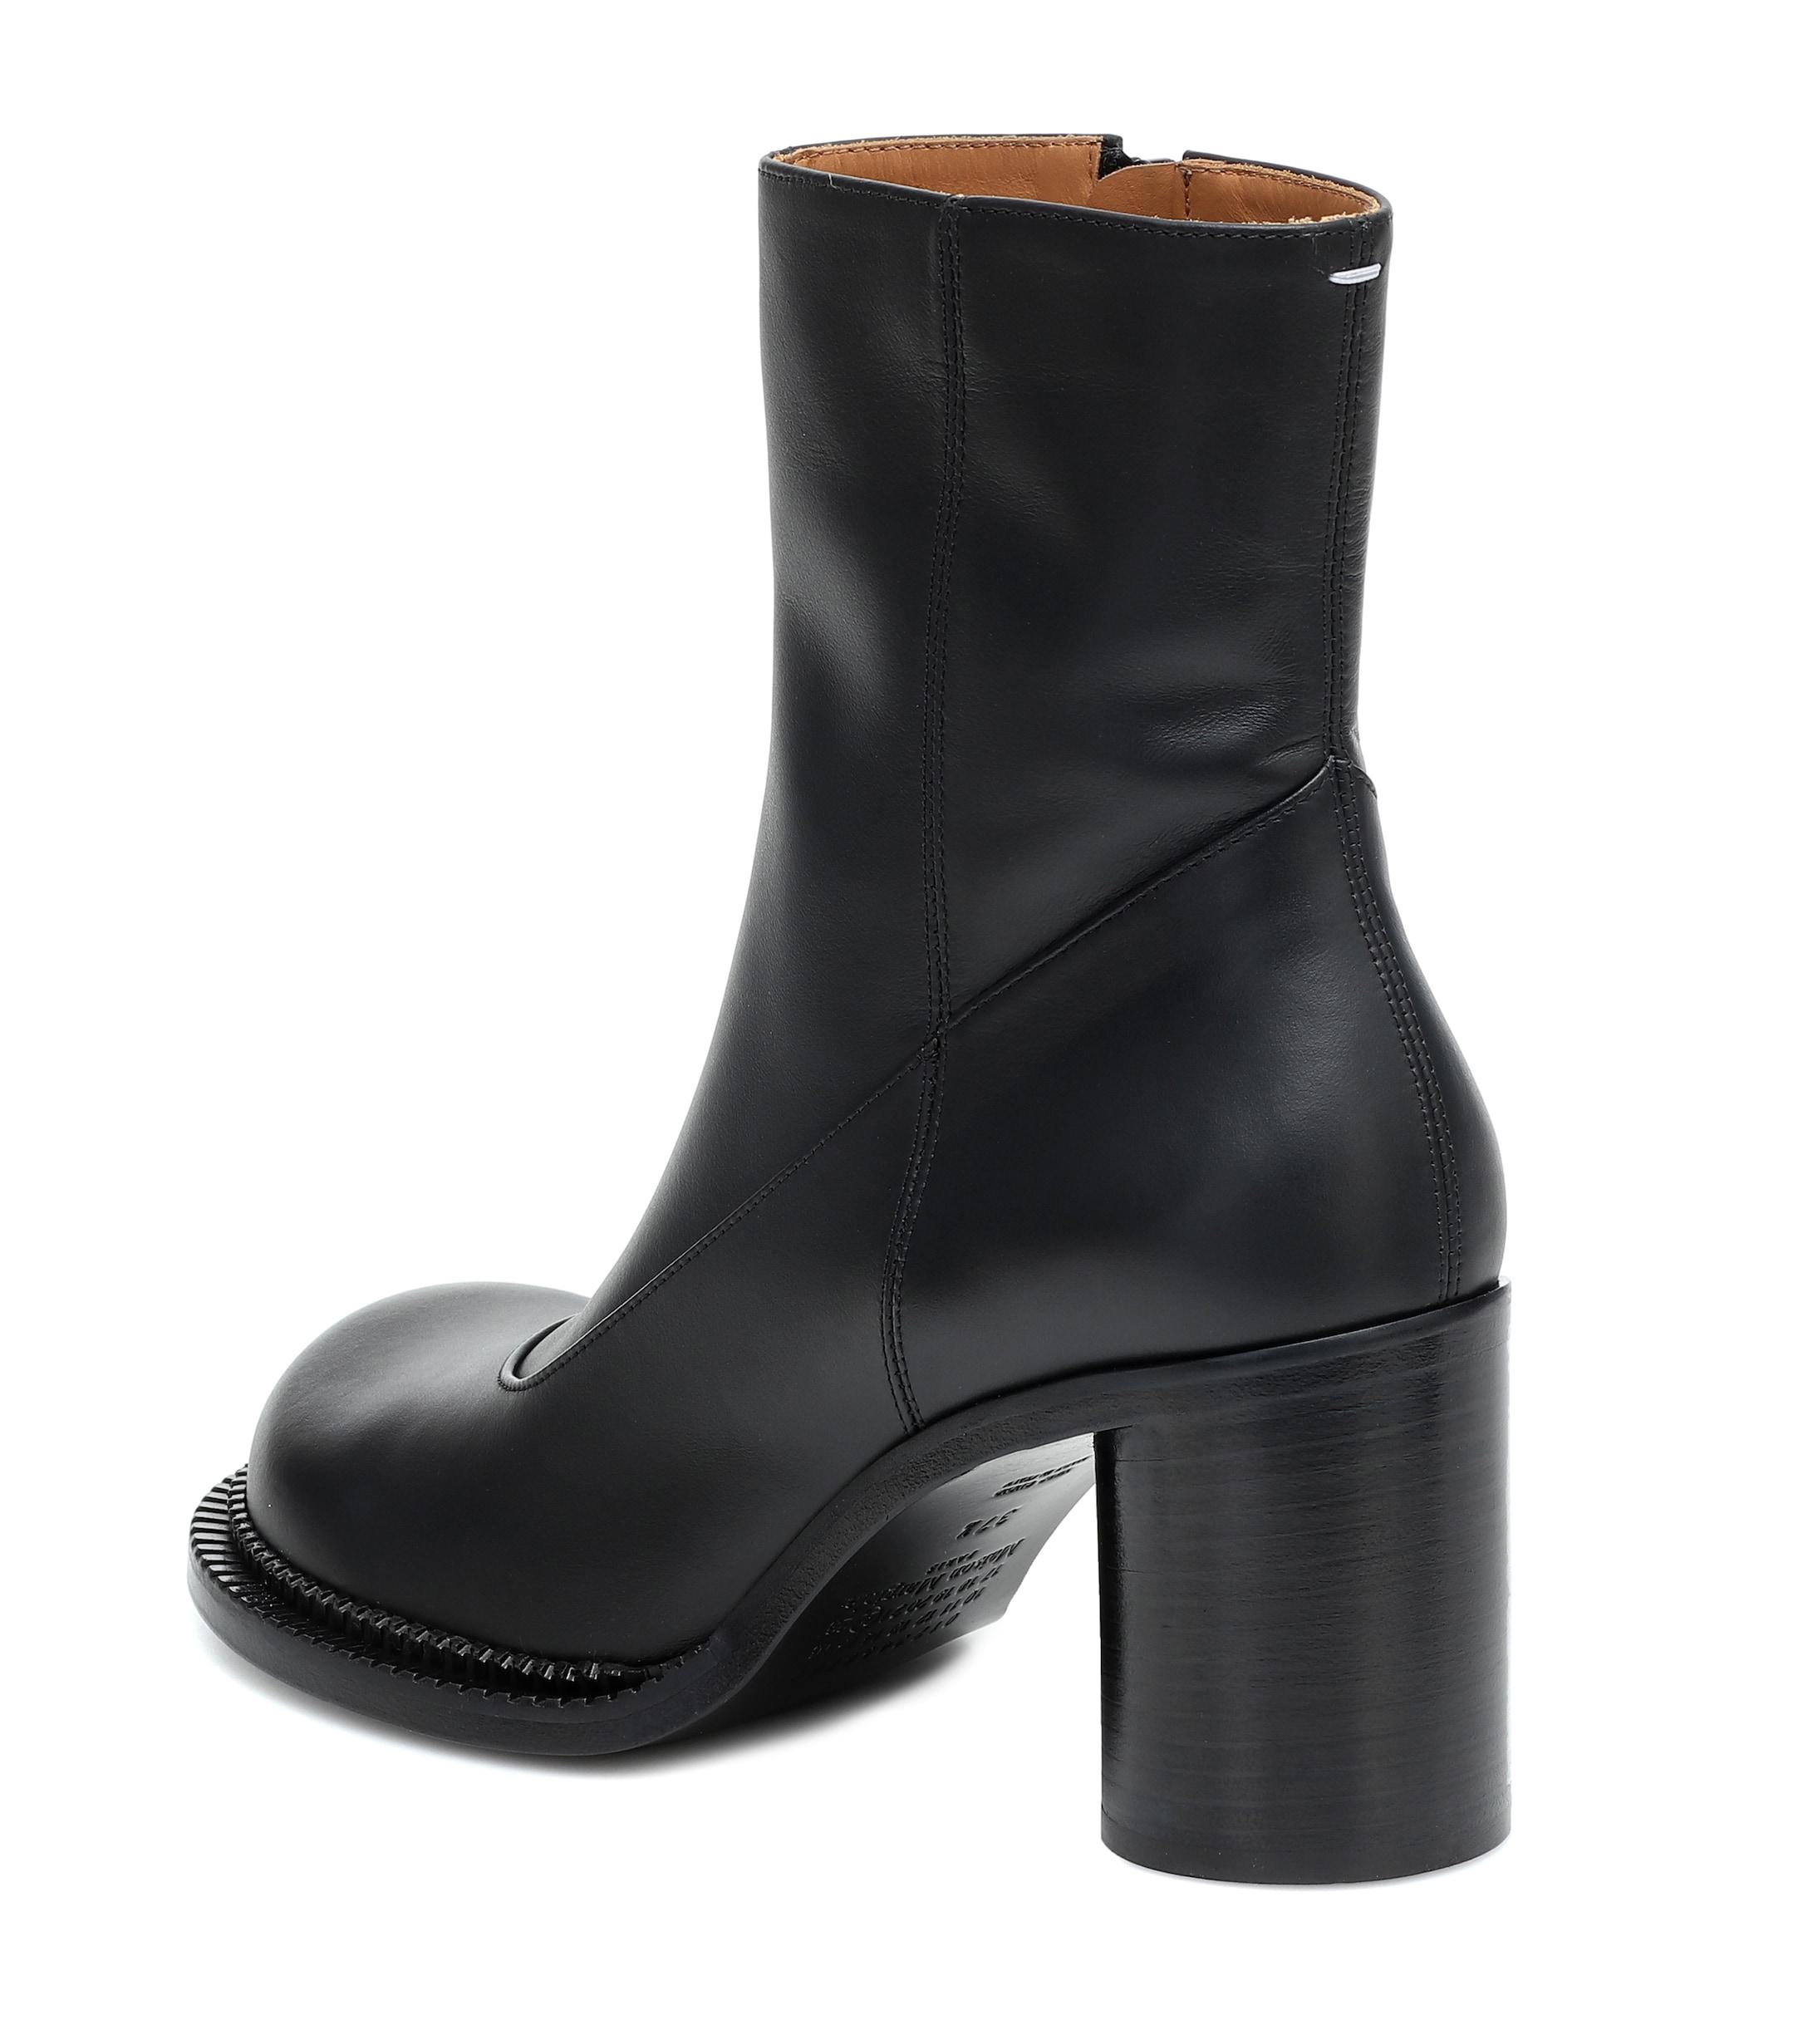 Maison Margiela Leather Ankle Boots in Black - Lyst